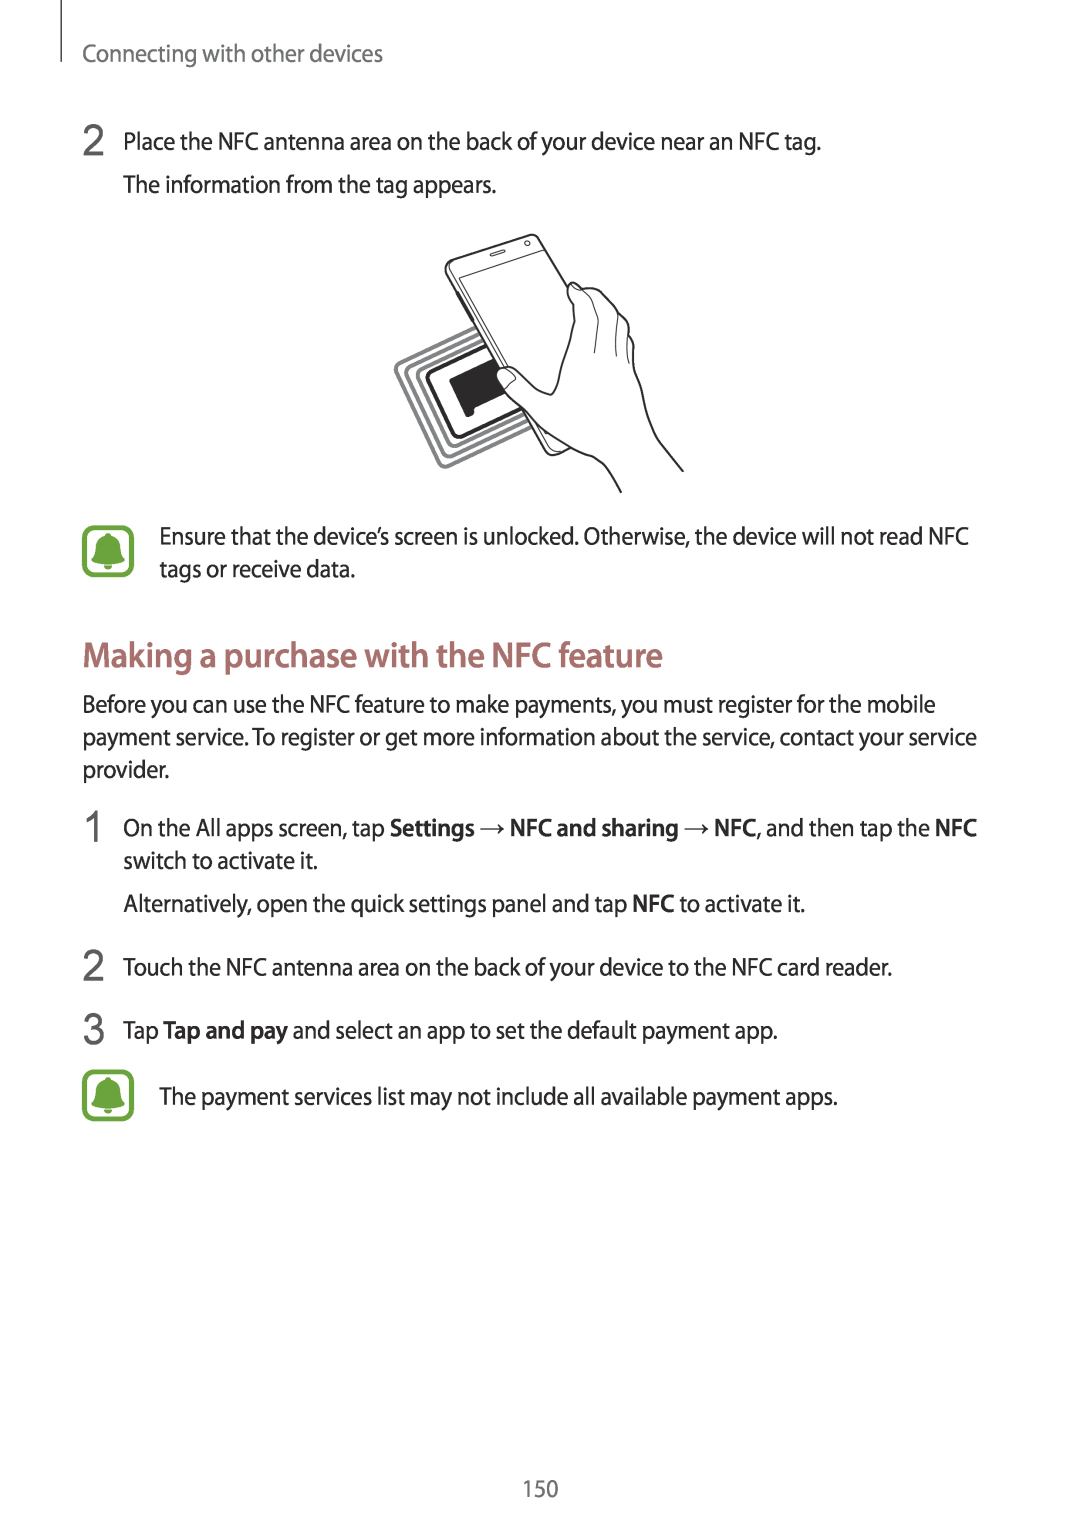 Samsung SM-N915FZWYNEE, SM-N915FZWYEUR manual Making a purchase with the NFC feature, Connecting with other devices 